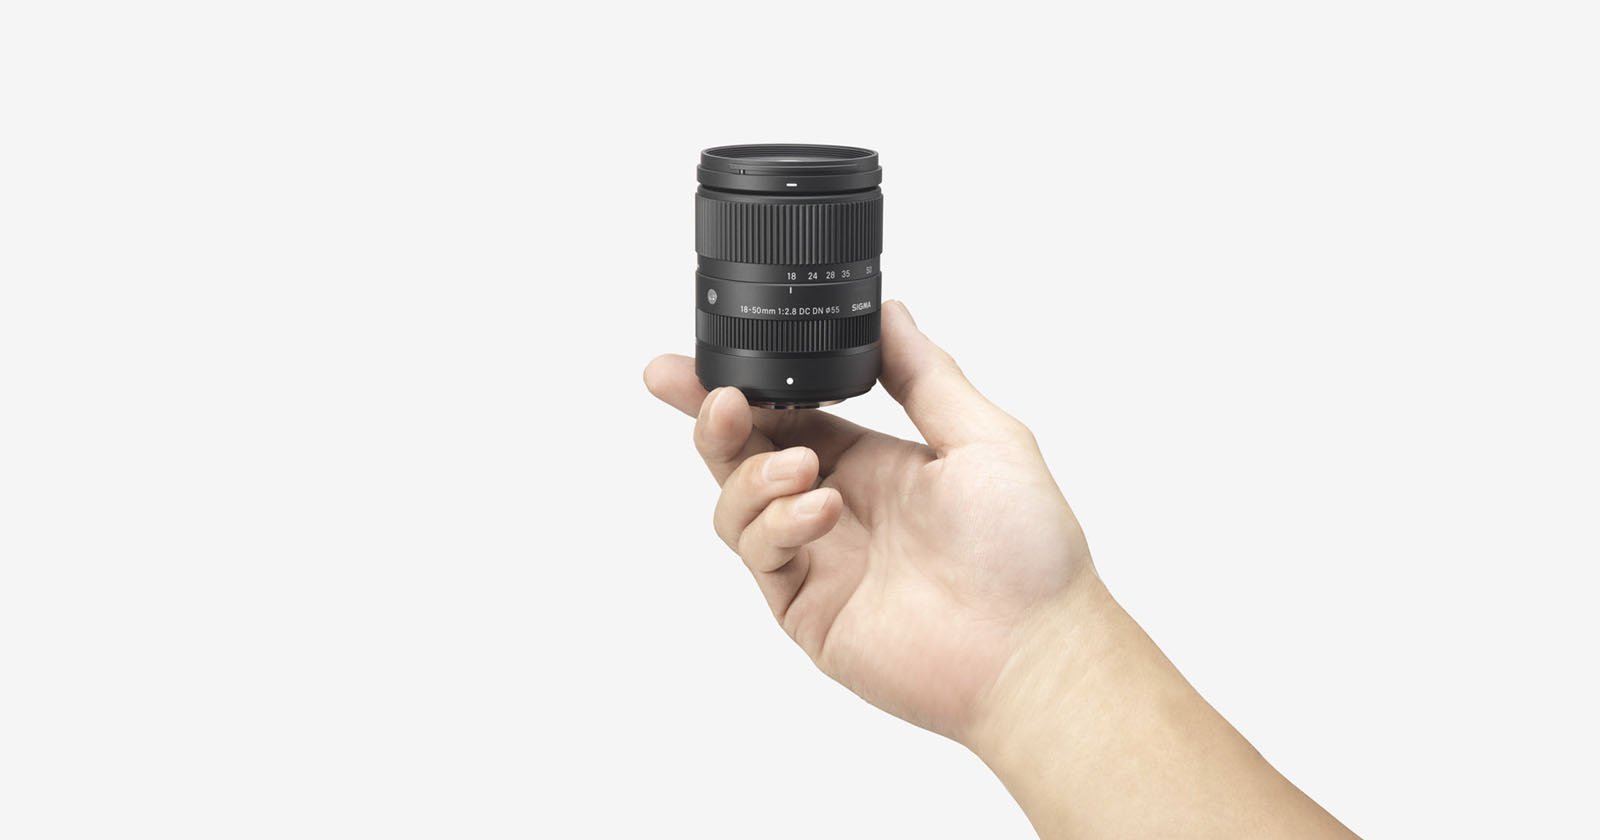 Sigma's New 18-50mm f/2.8 Lens for Fujifilm X Mount is Super Small